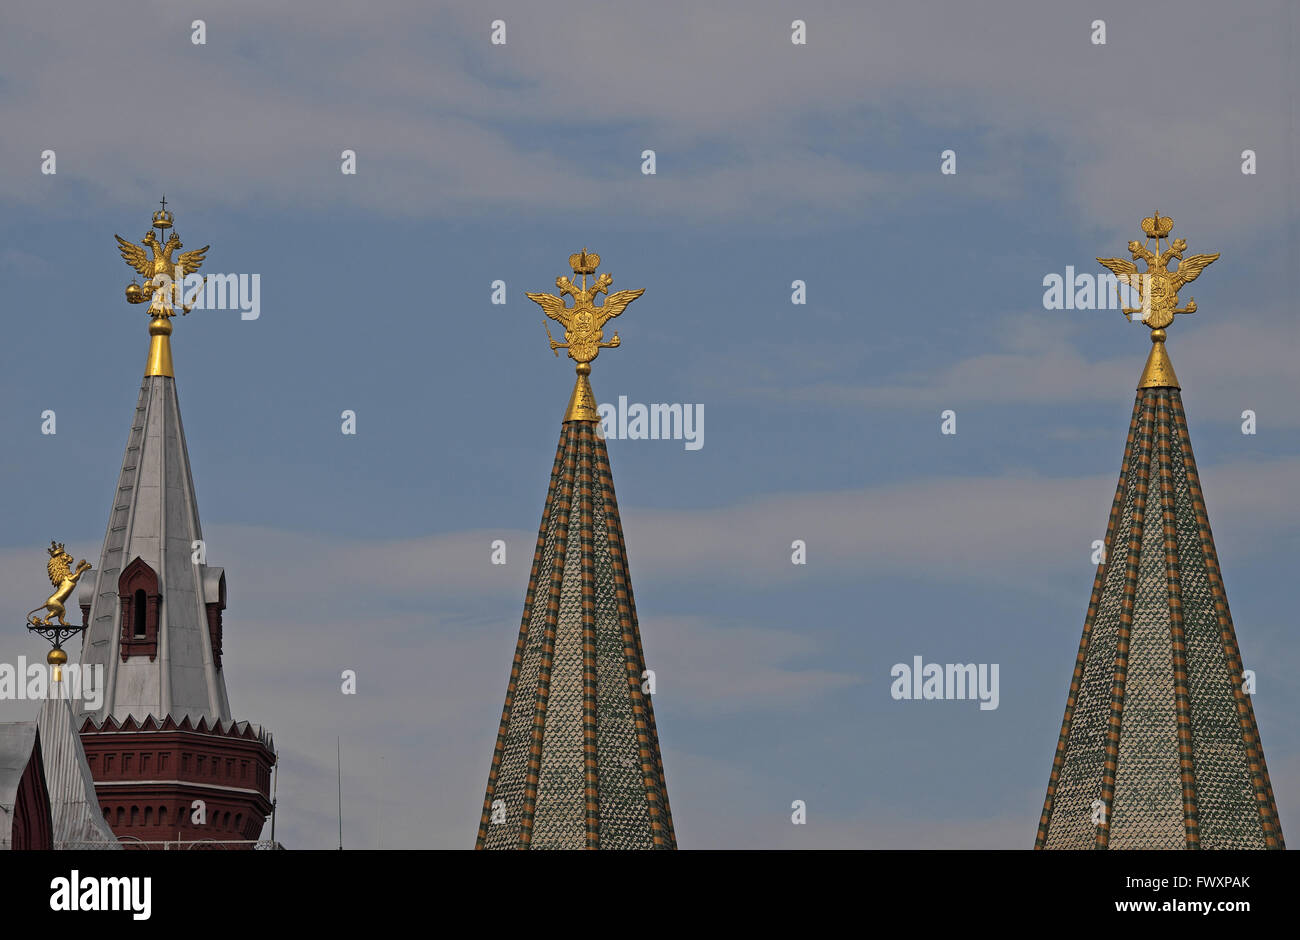 Golden lion and two headed eagle symbols on the Historical Museum (left) and Ressurection Gate, Red Square, Moscow, Russia. Stock Photo